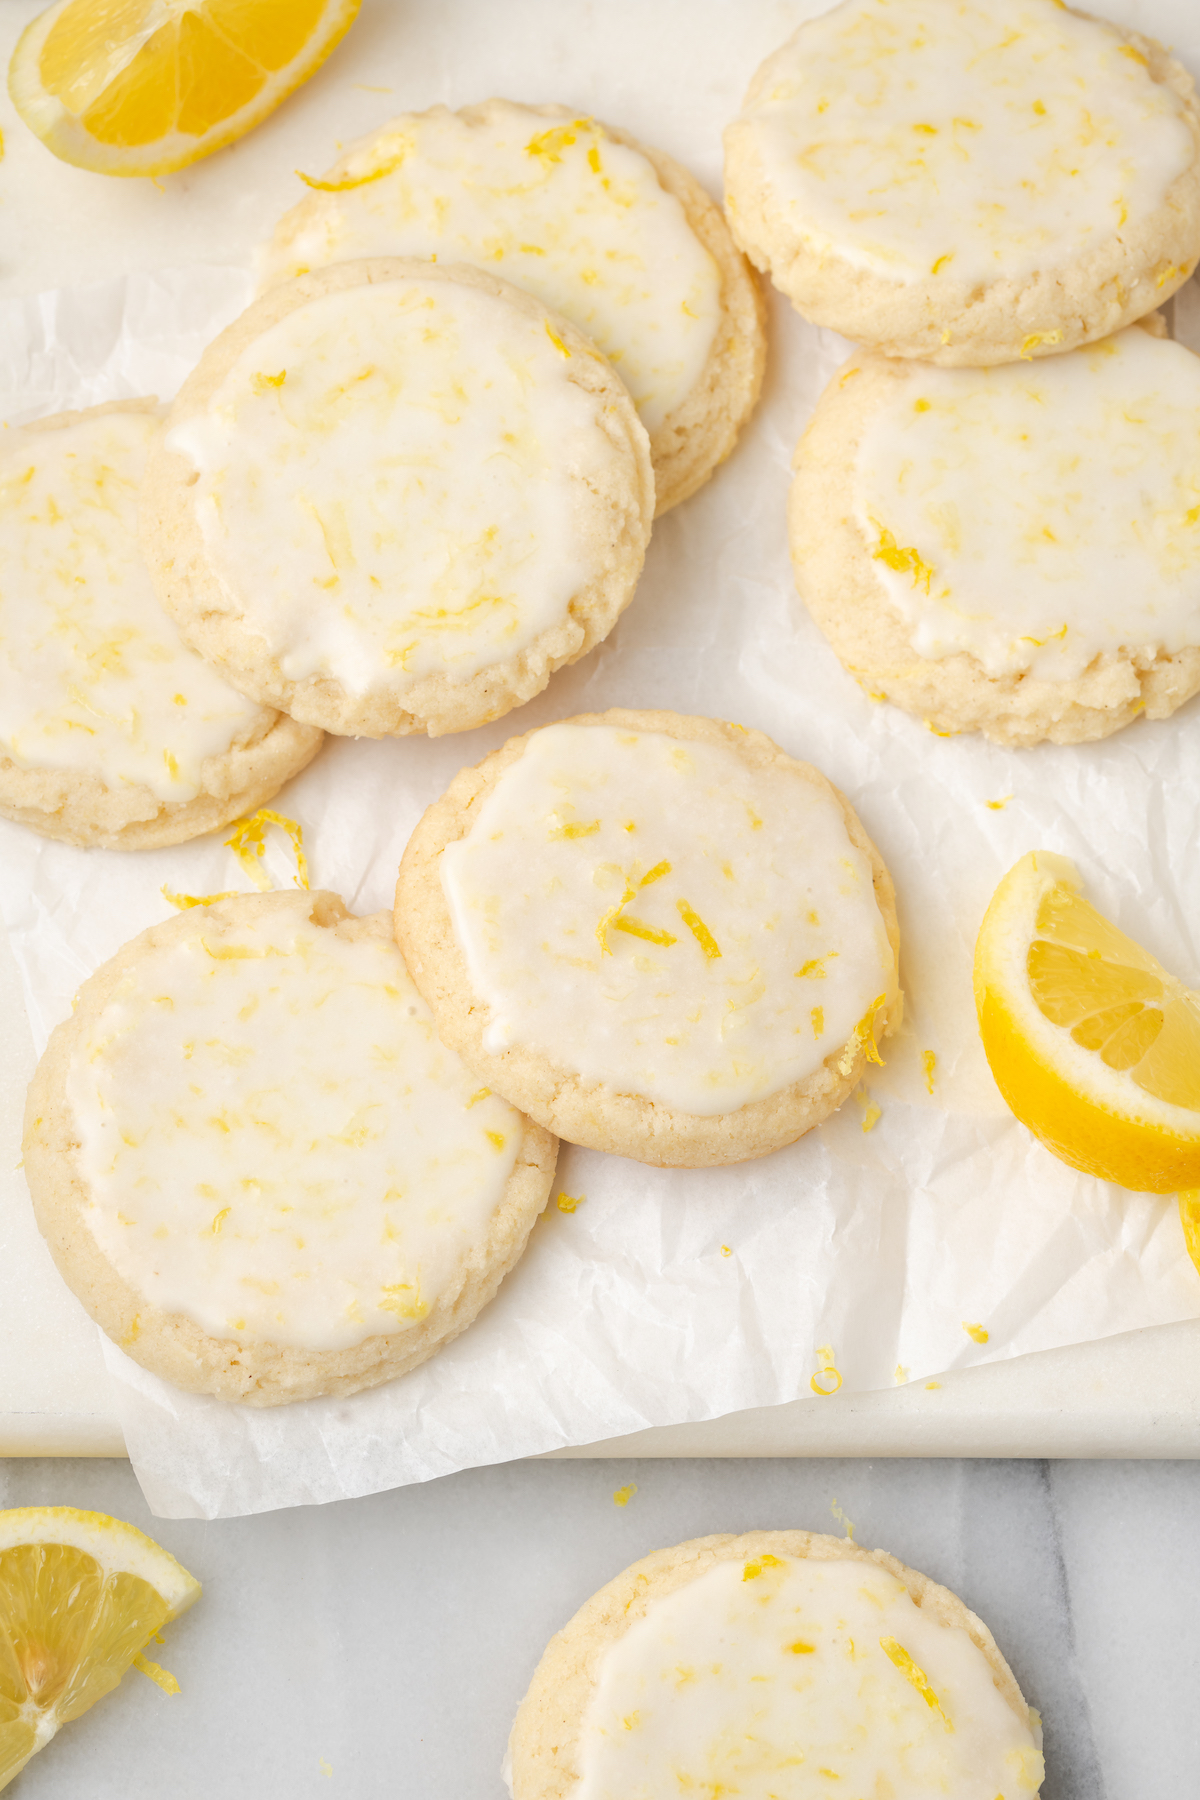 Overhead view of lemon cookies topped with lemon zest